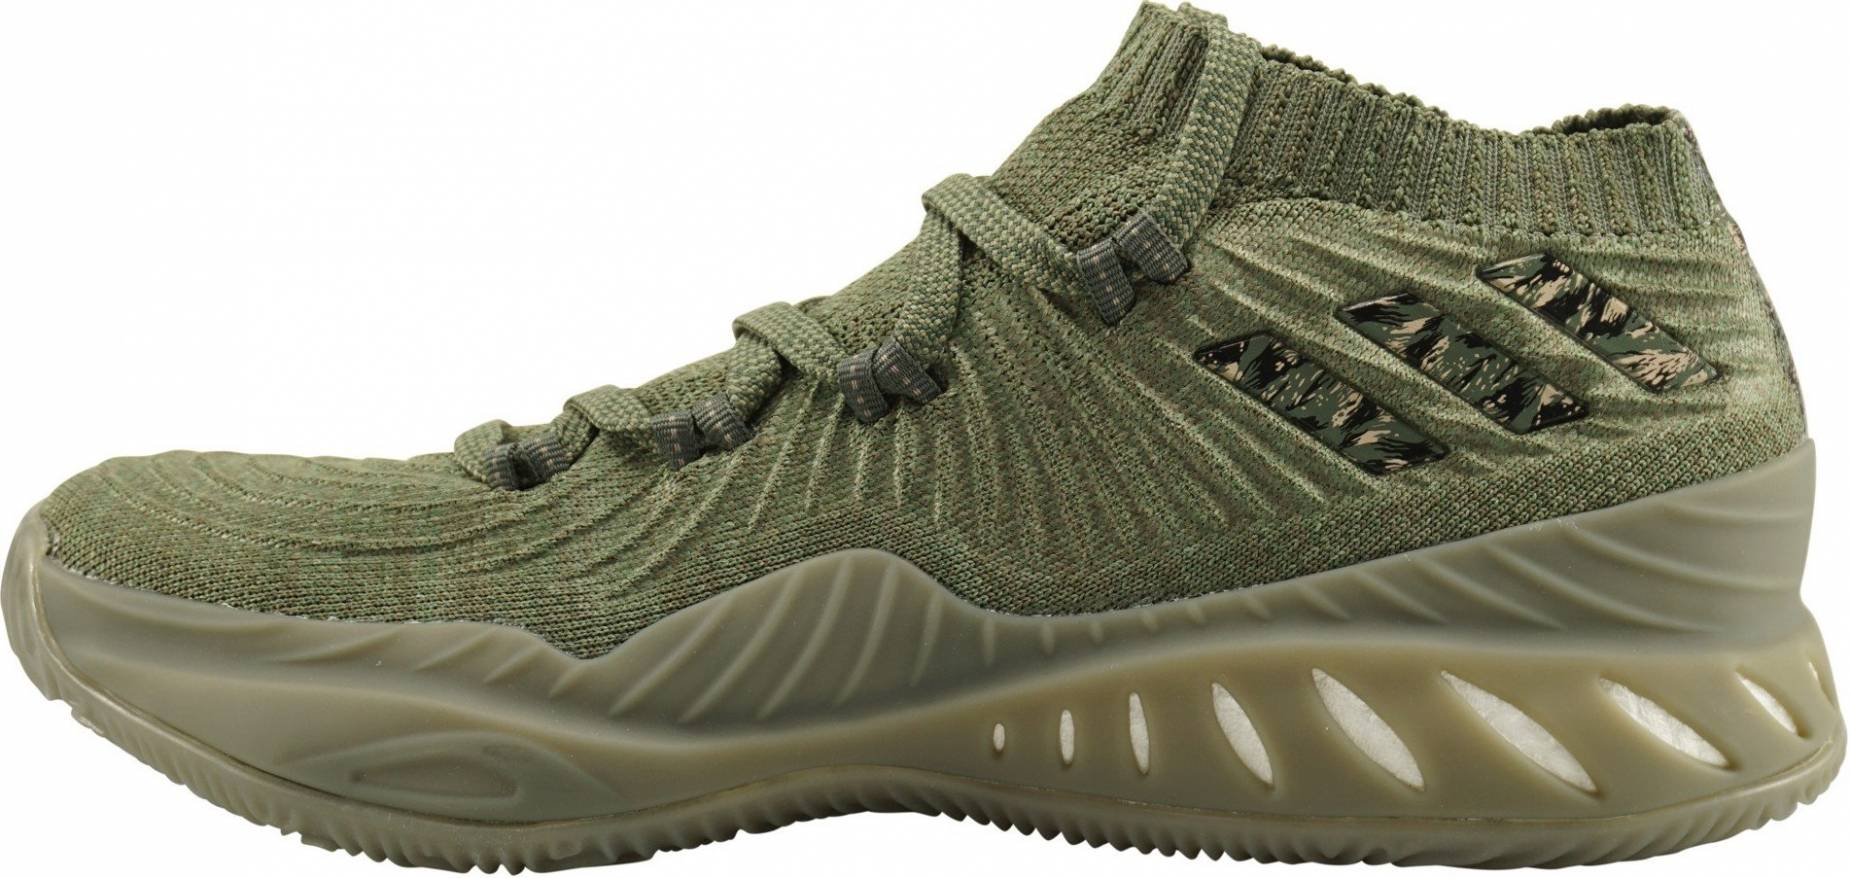 adidas crazy explosive low basketball shoes